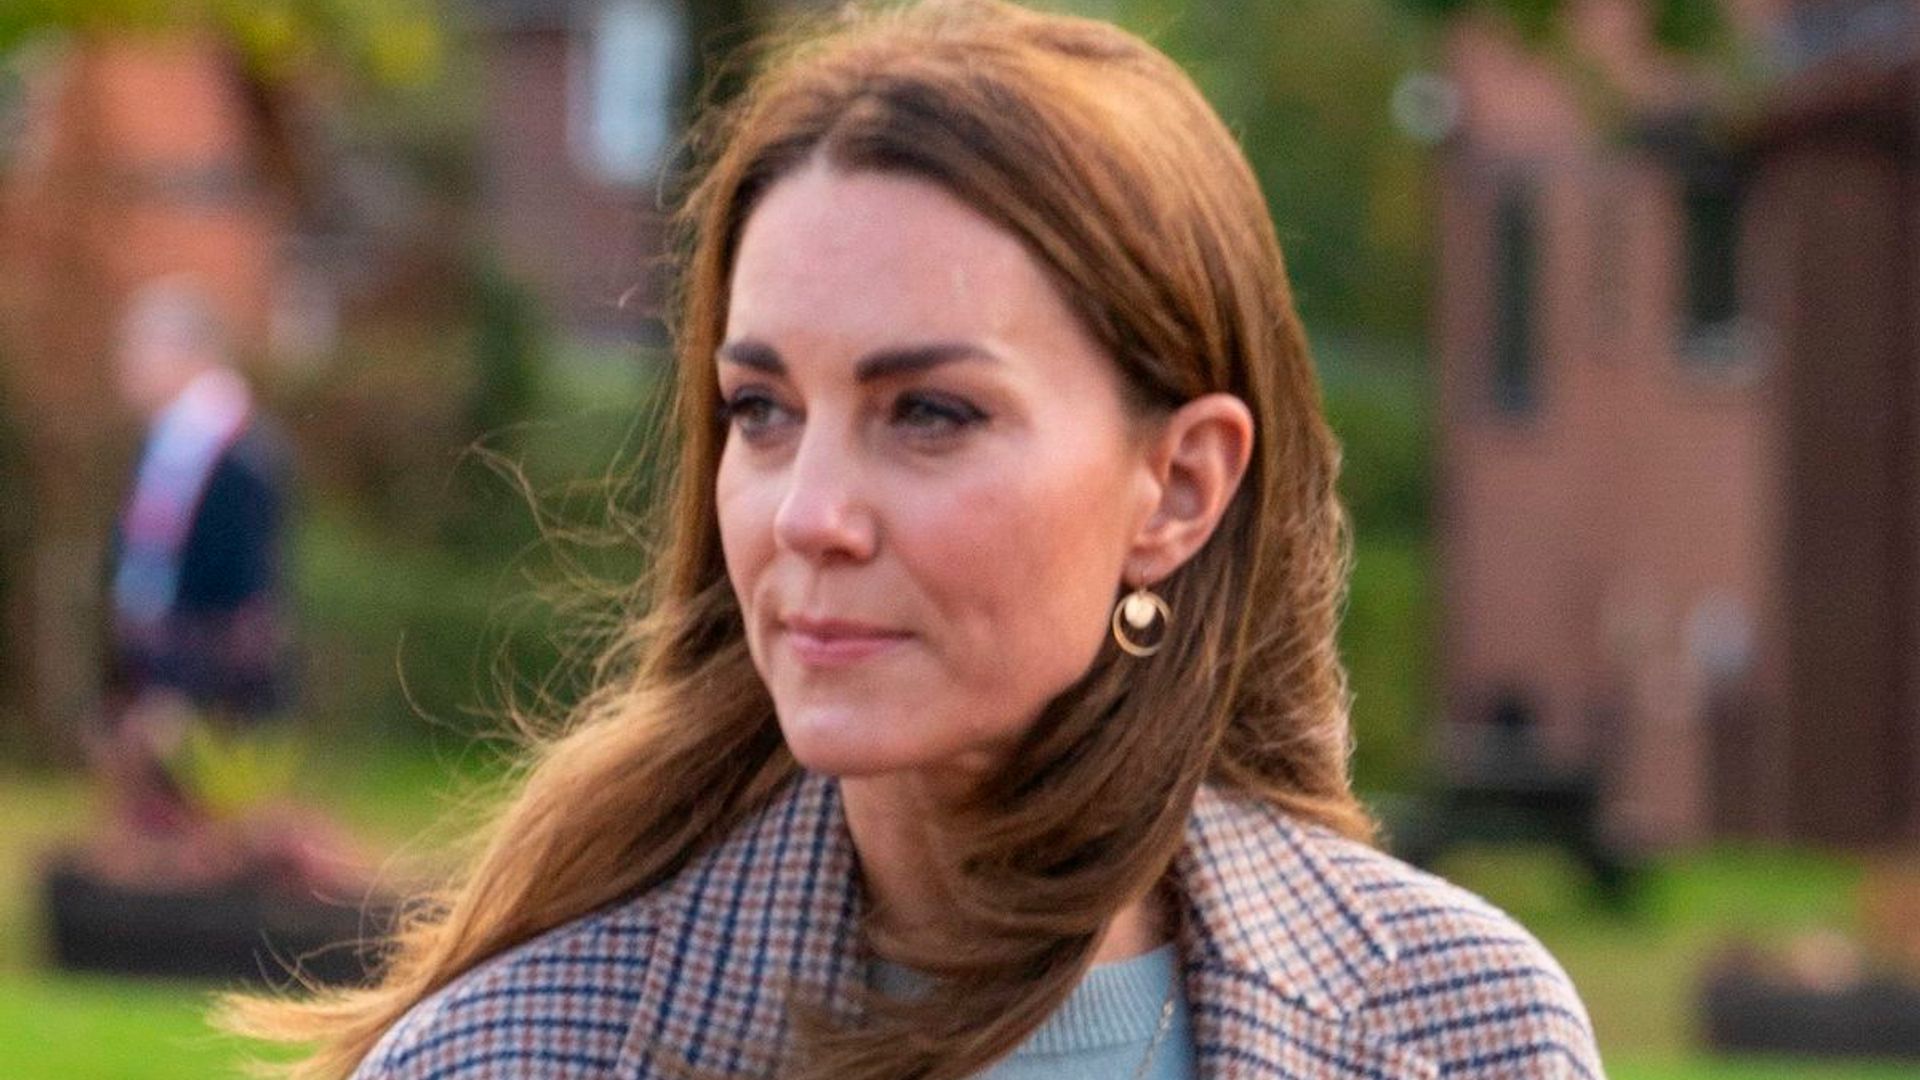 Kate Middleton is too relatable in candid picture after book launch